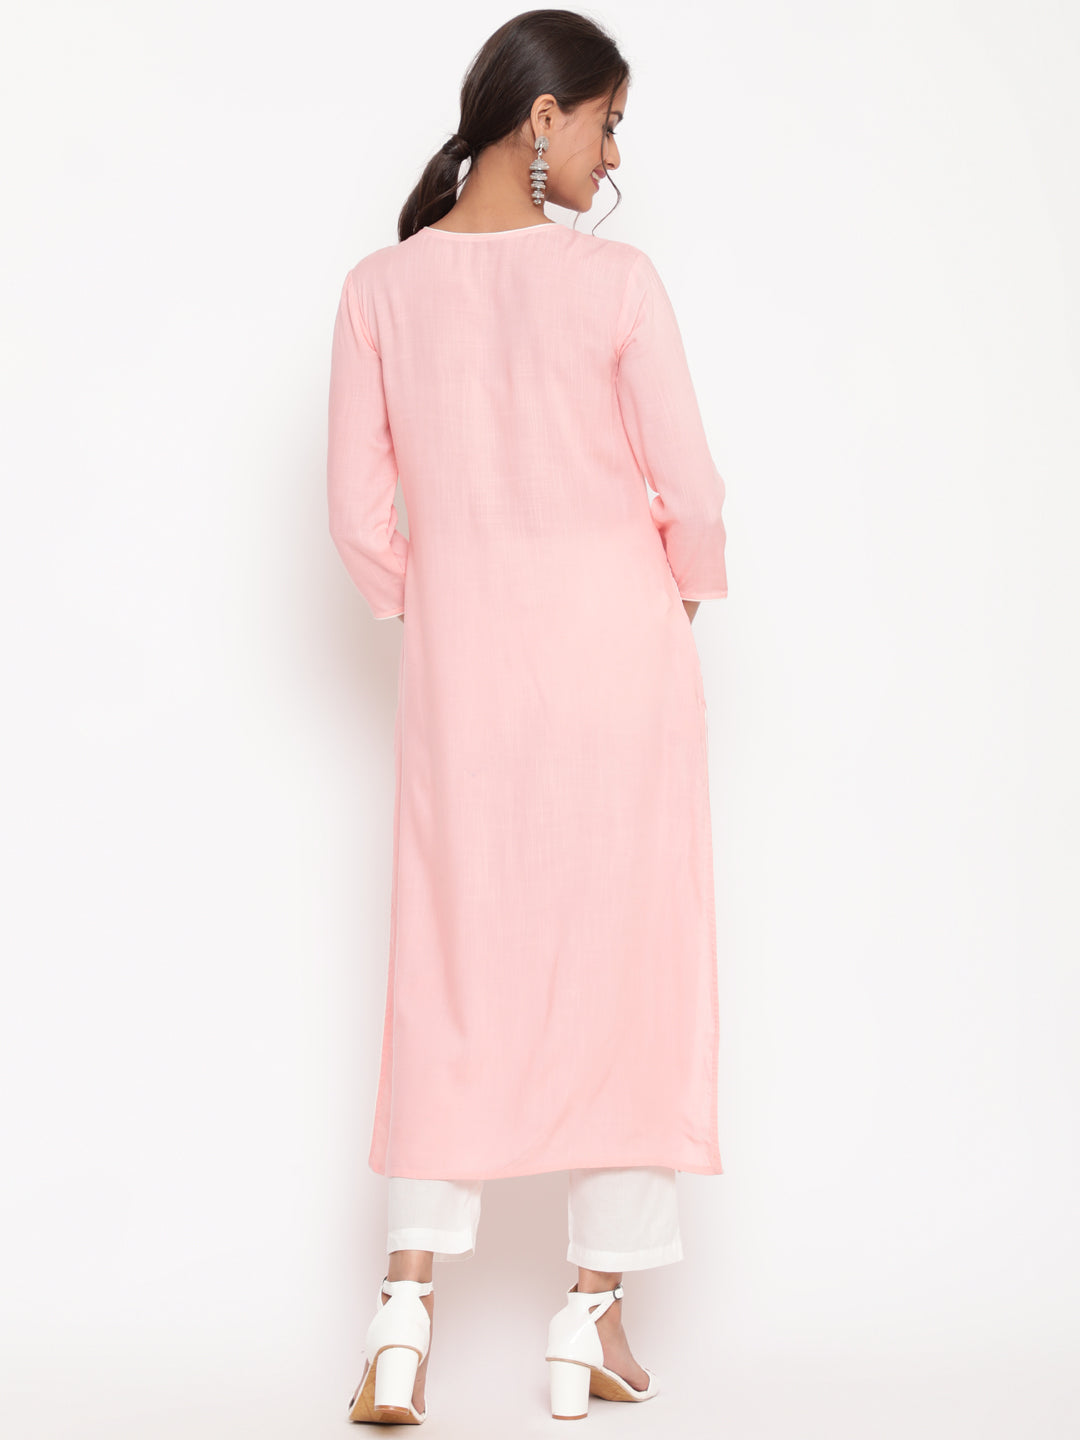 Woman posing in Pink Embroidered Casual A Line Kurta